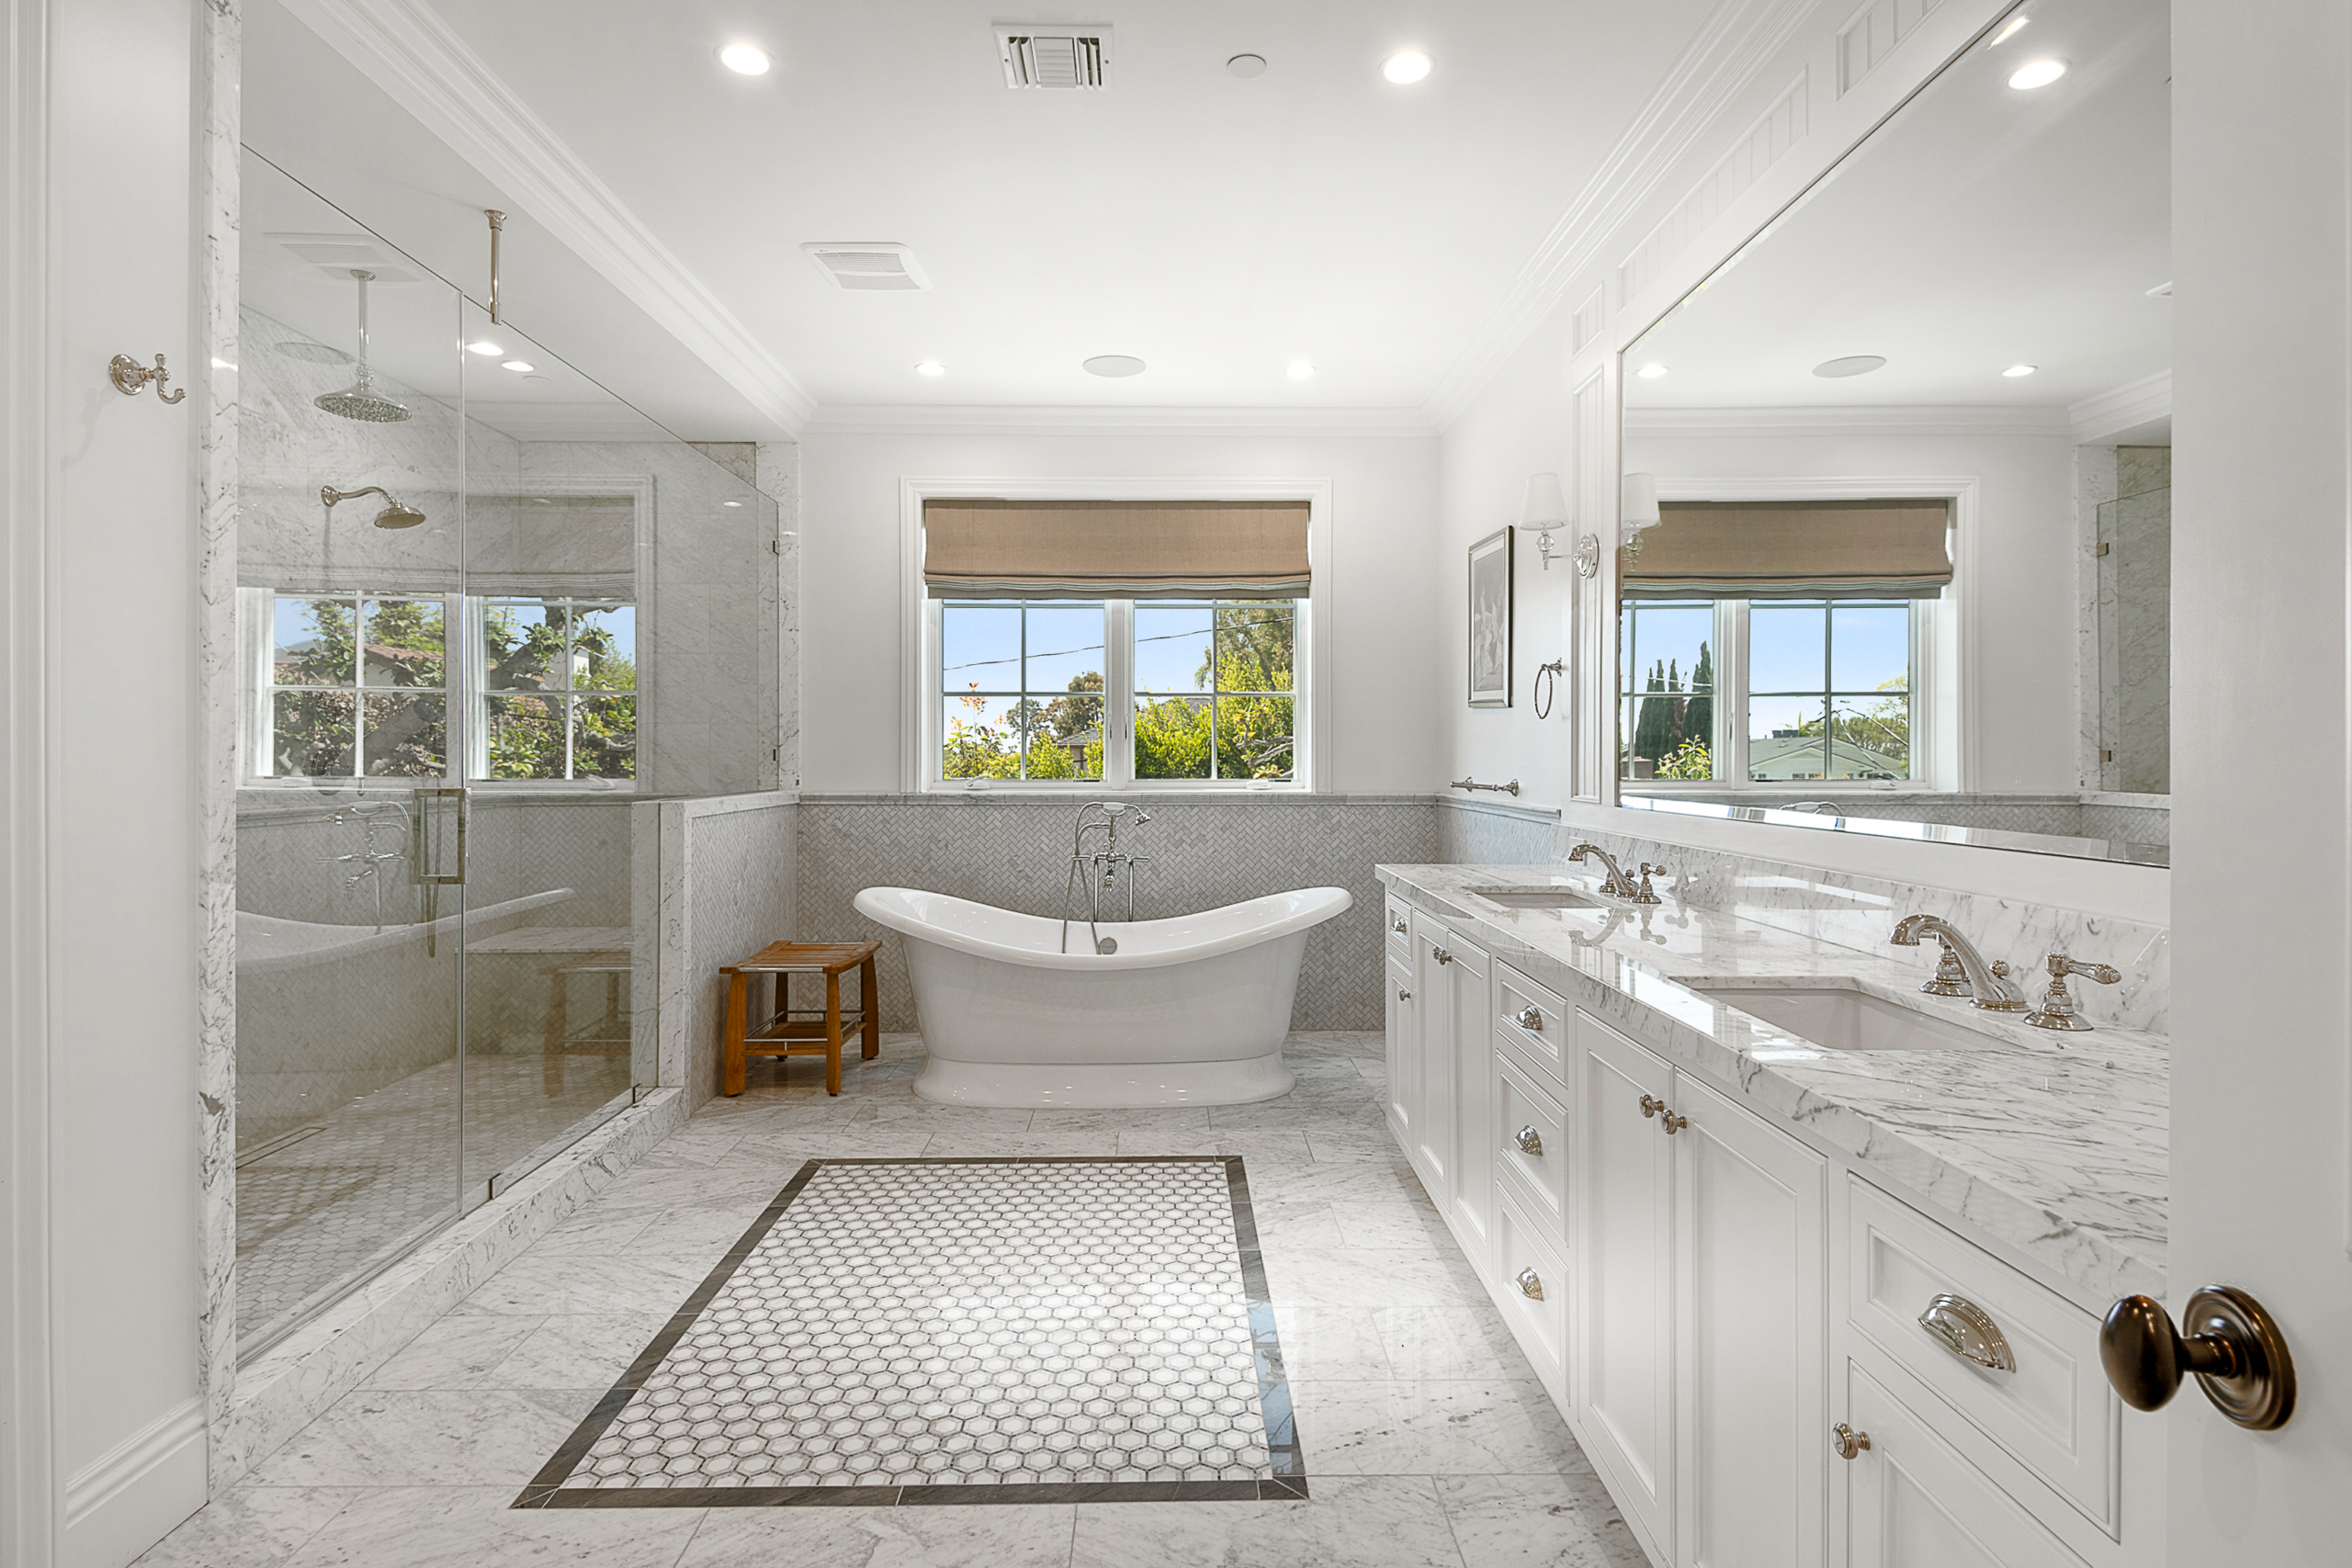 Bathroom with large walk-in shower with seating, soaker tub, window and large double vanity. Marble and grey and white tile